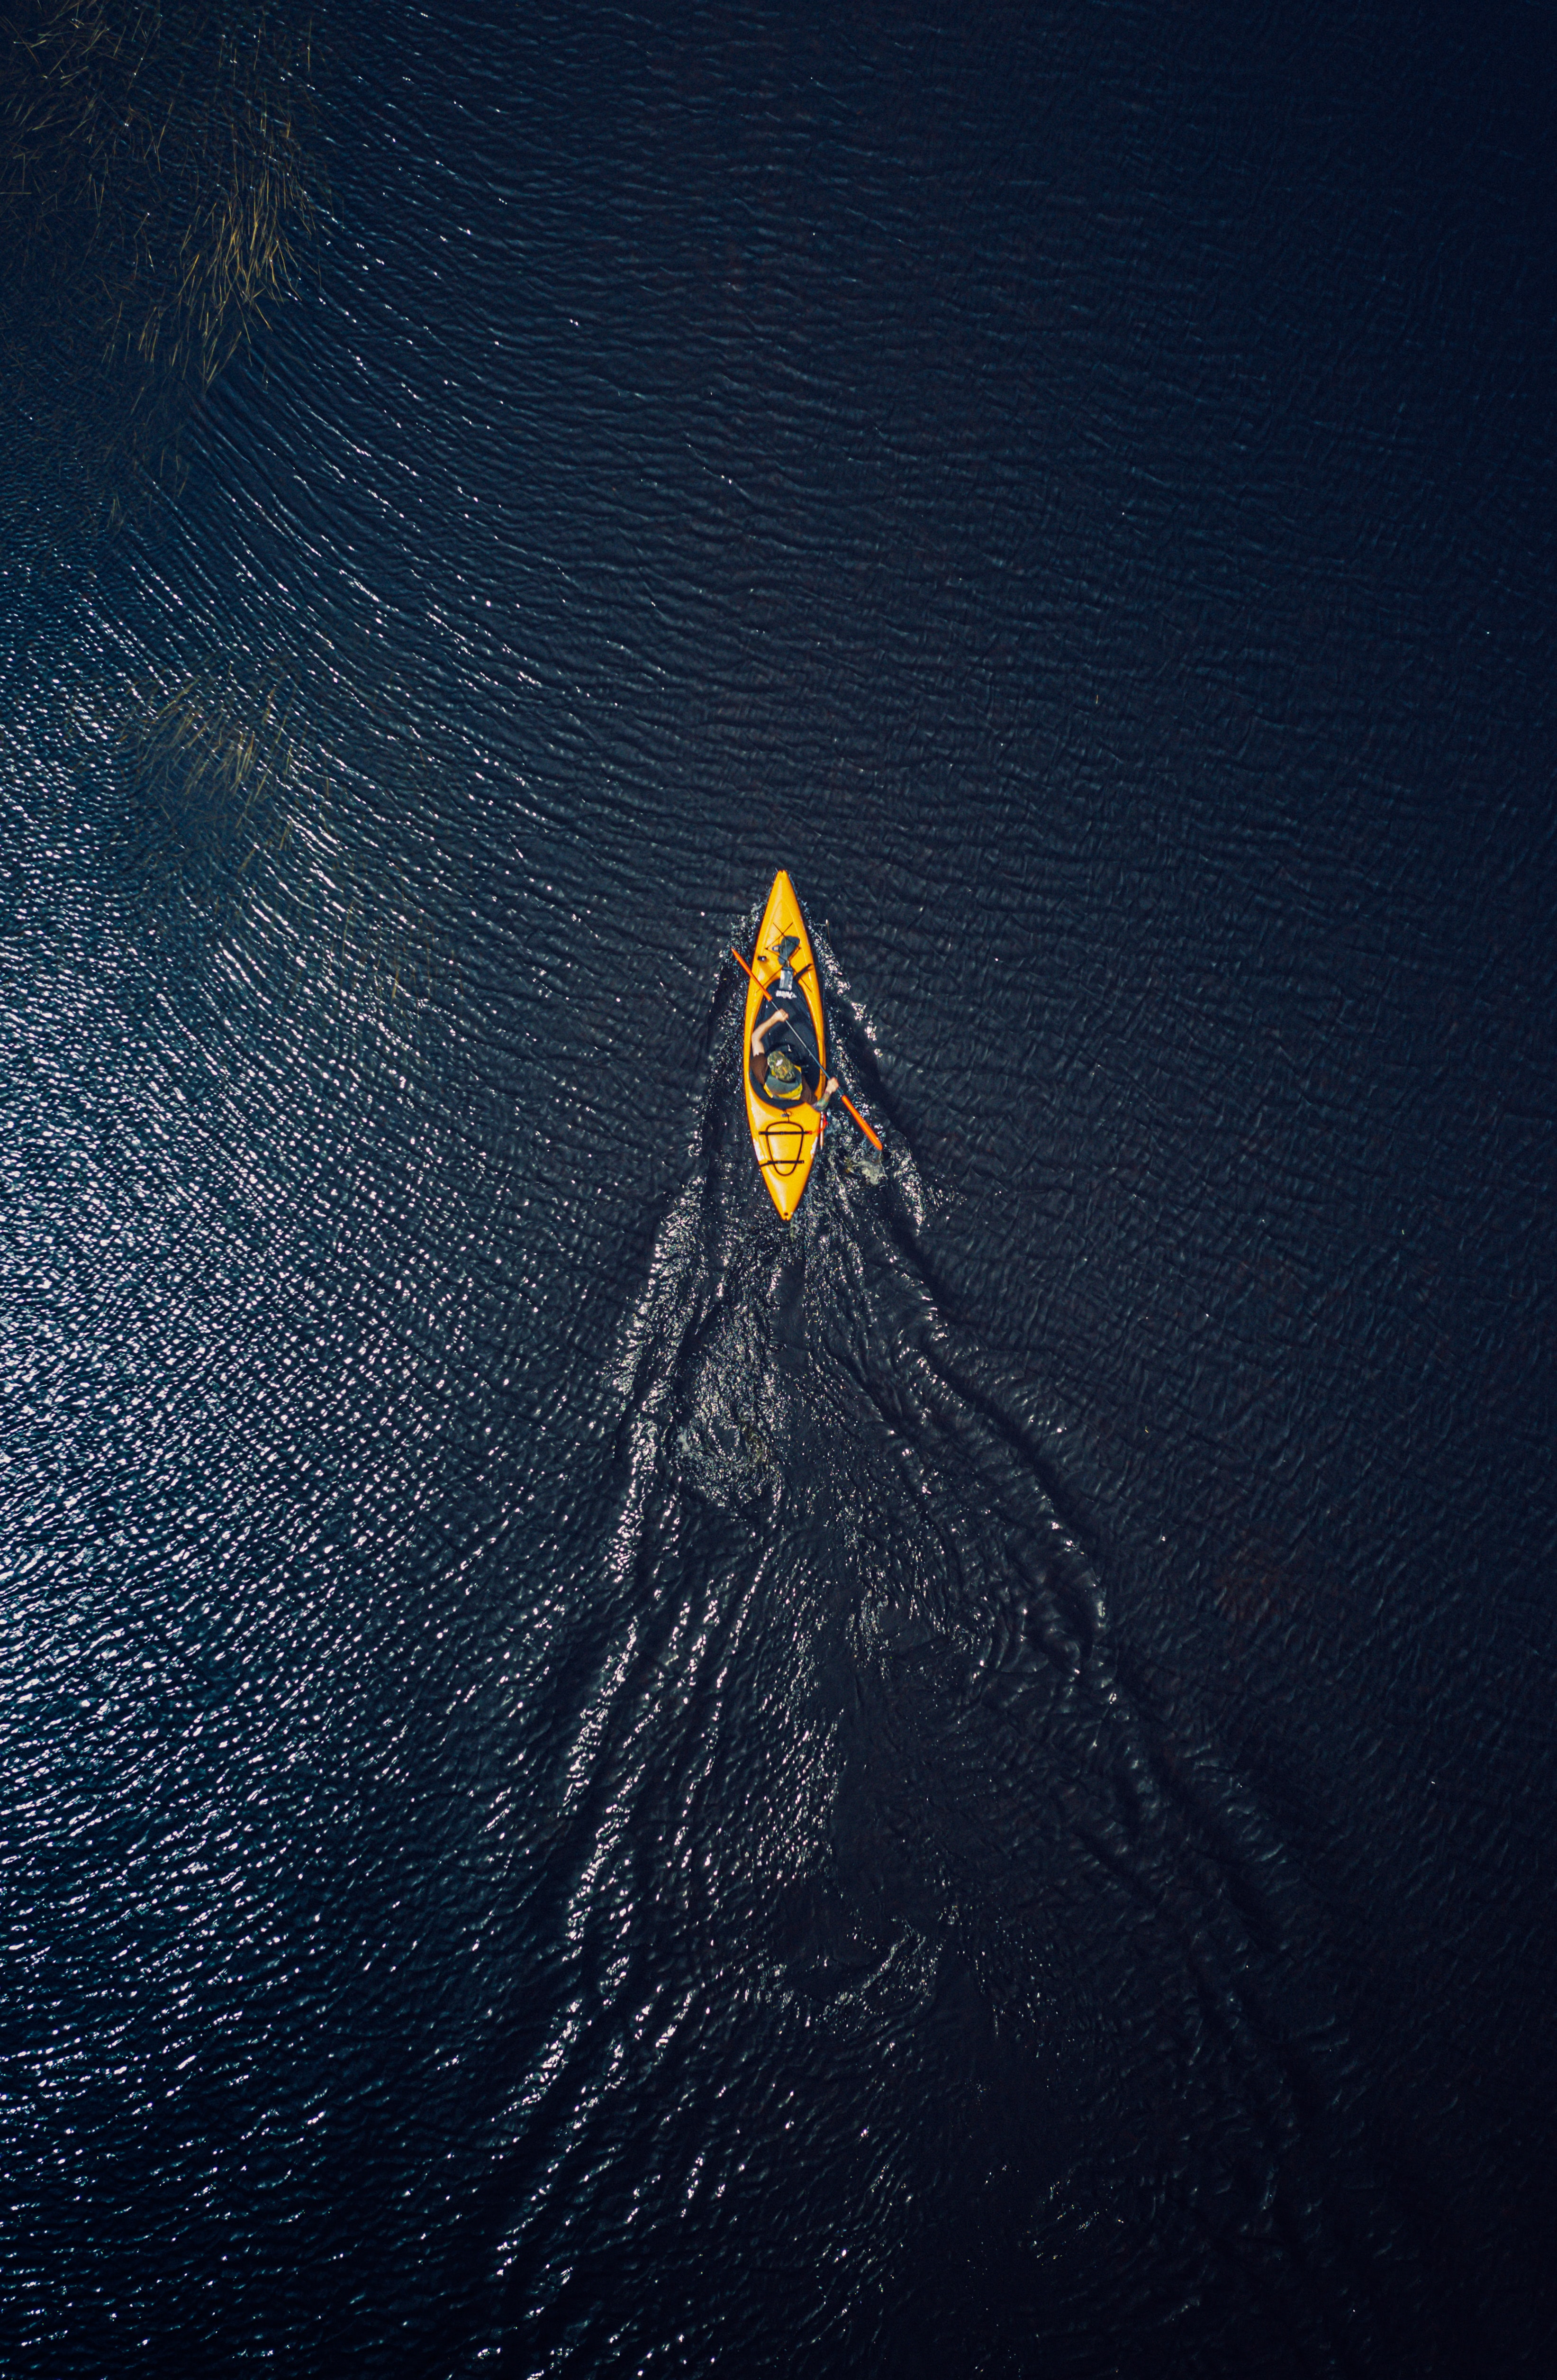 ocean, water, view from above, miscellanea, miscellaneous, boat, canoe